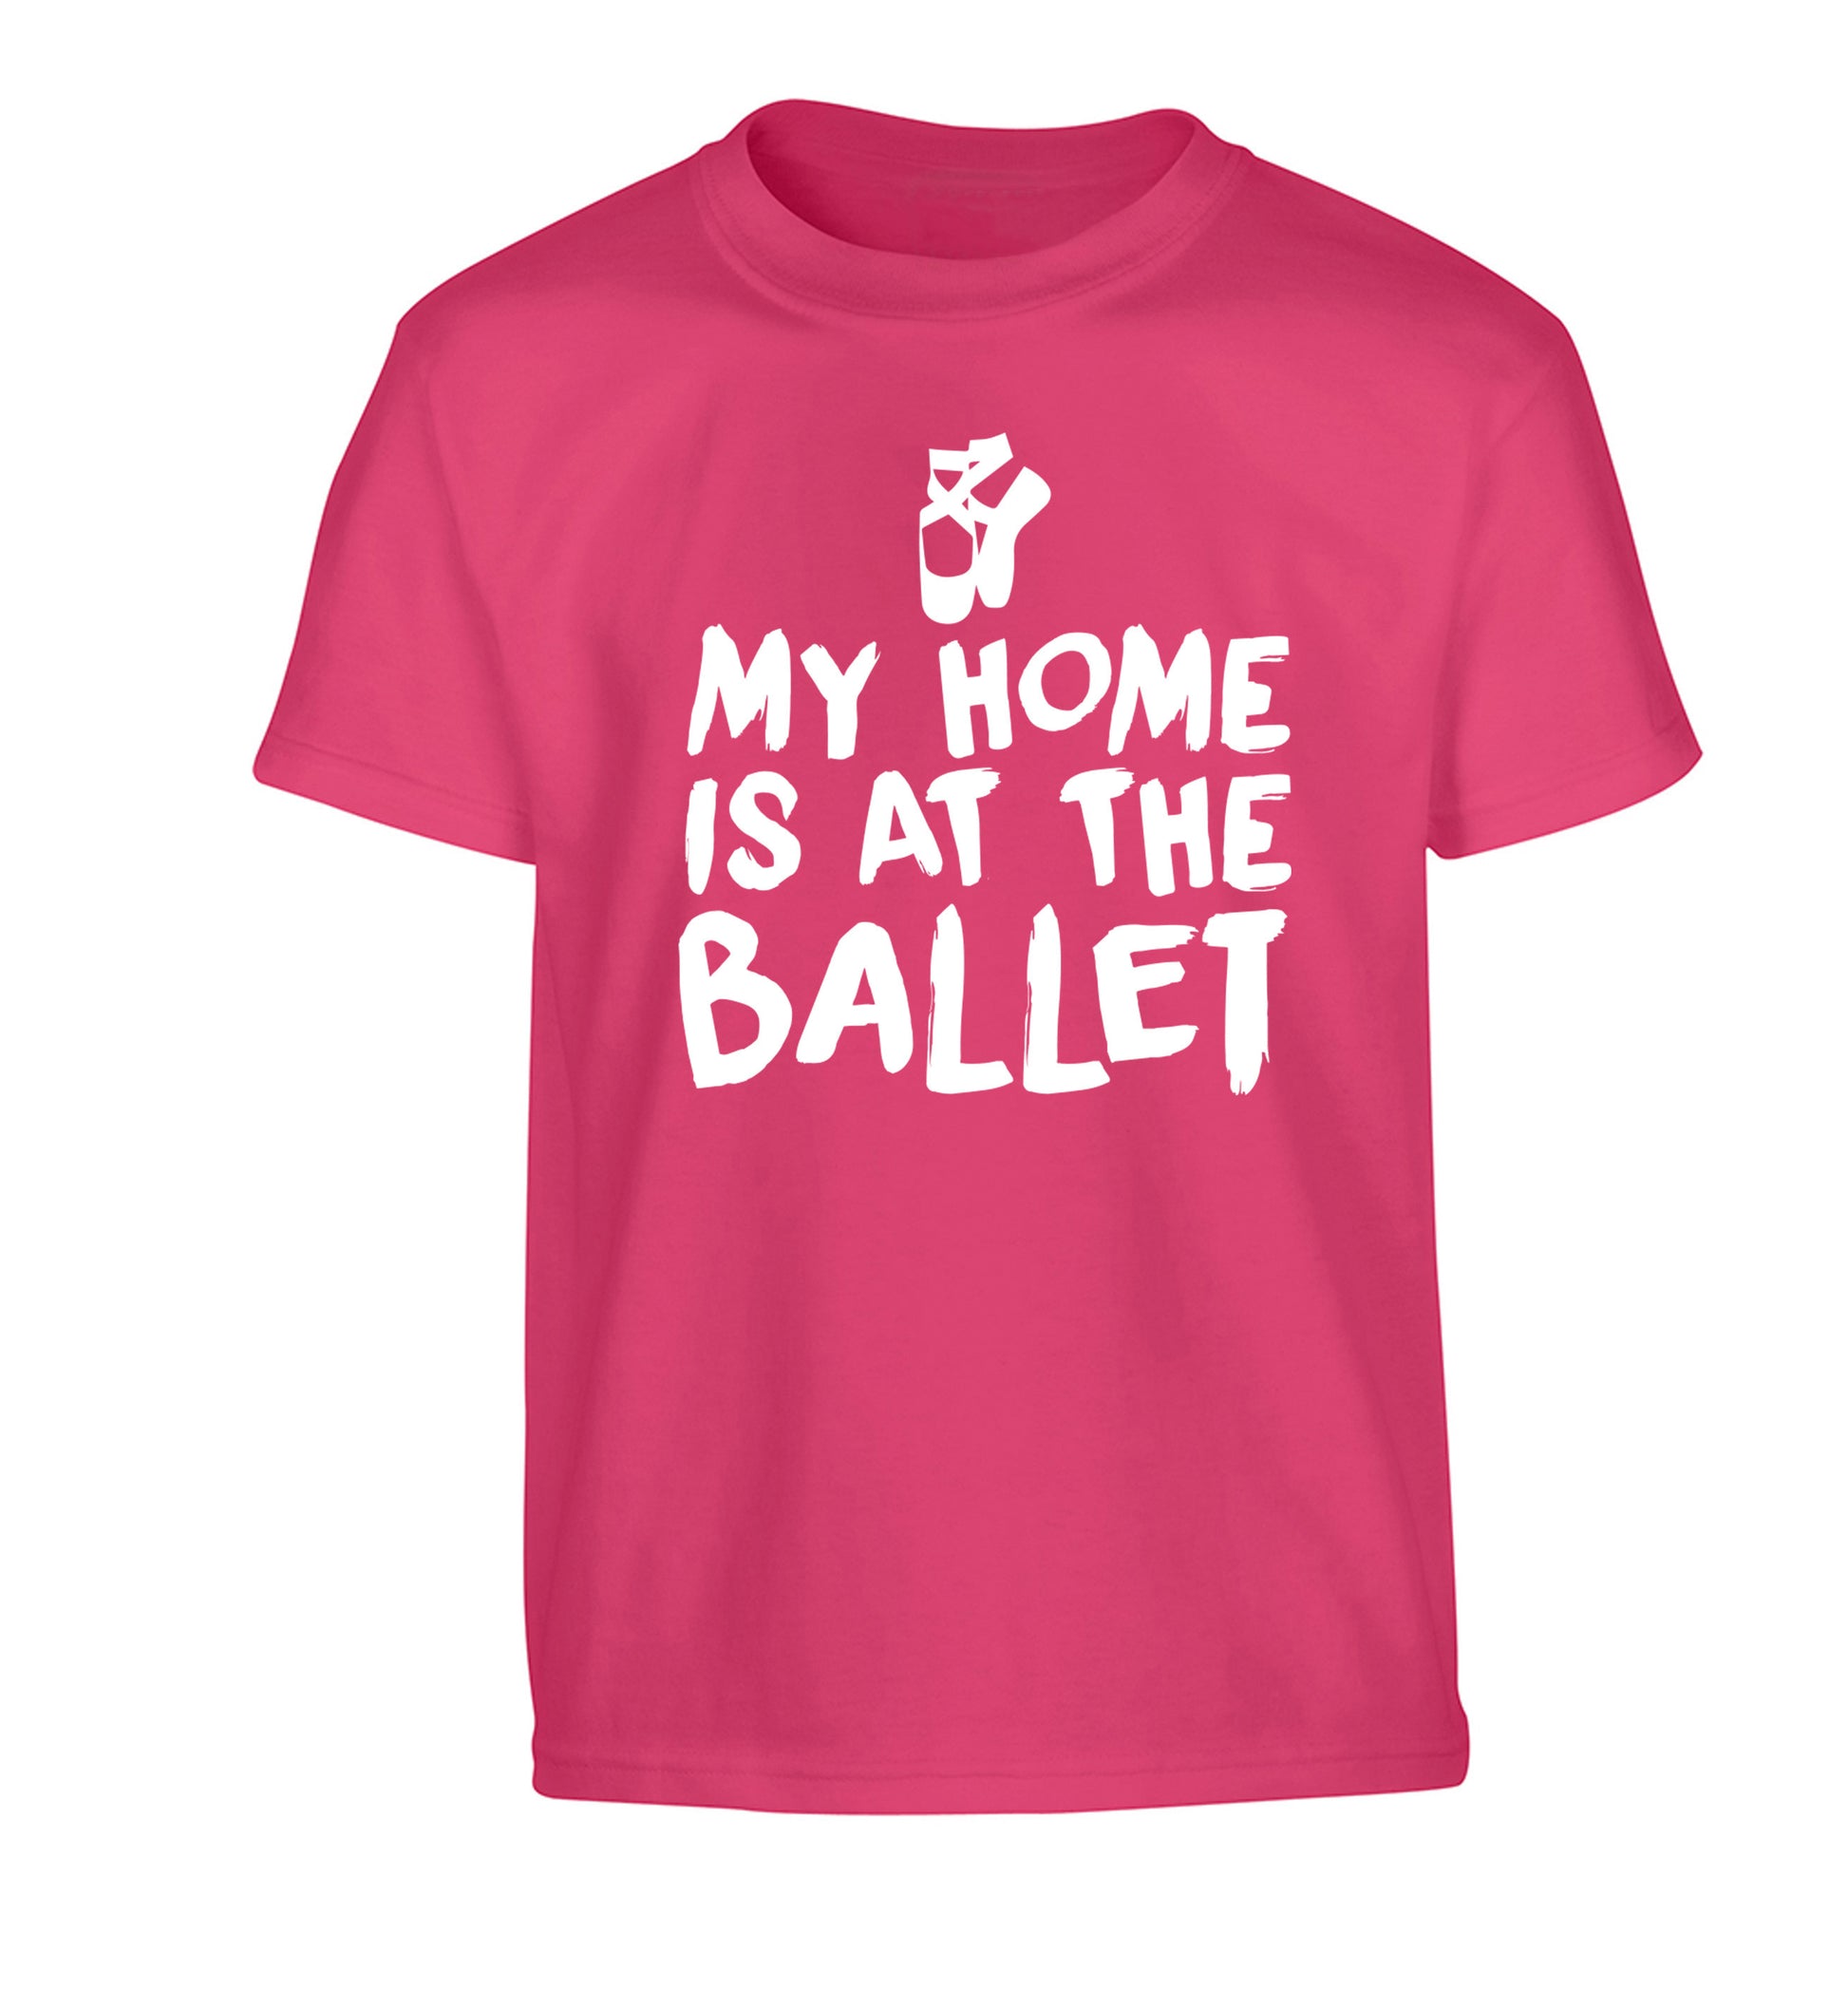 My home is at the ballet Children's pink Tshirt 12-14 Years